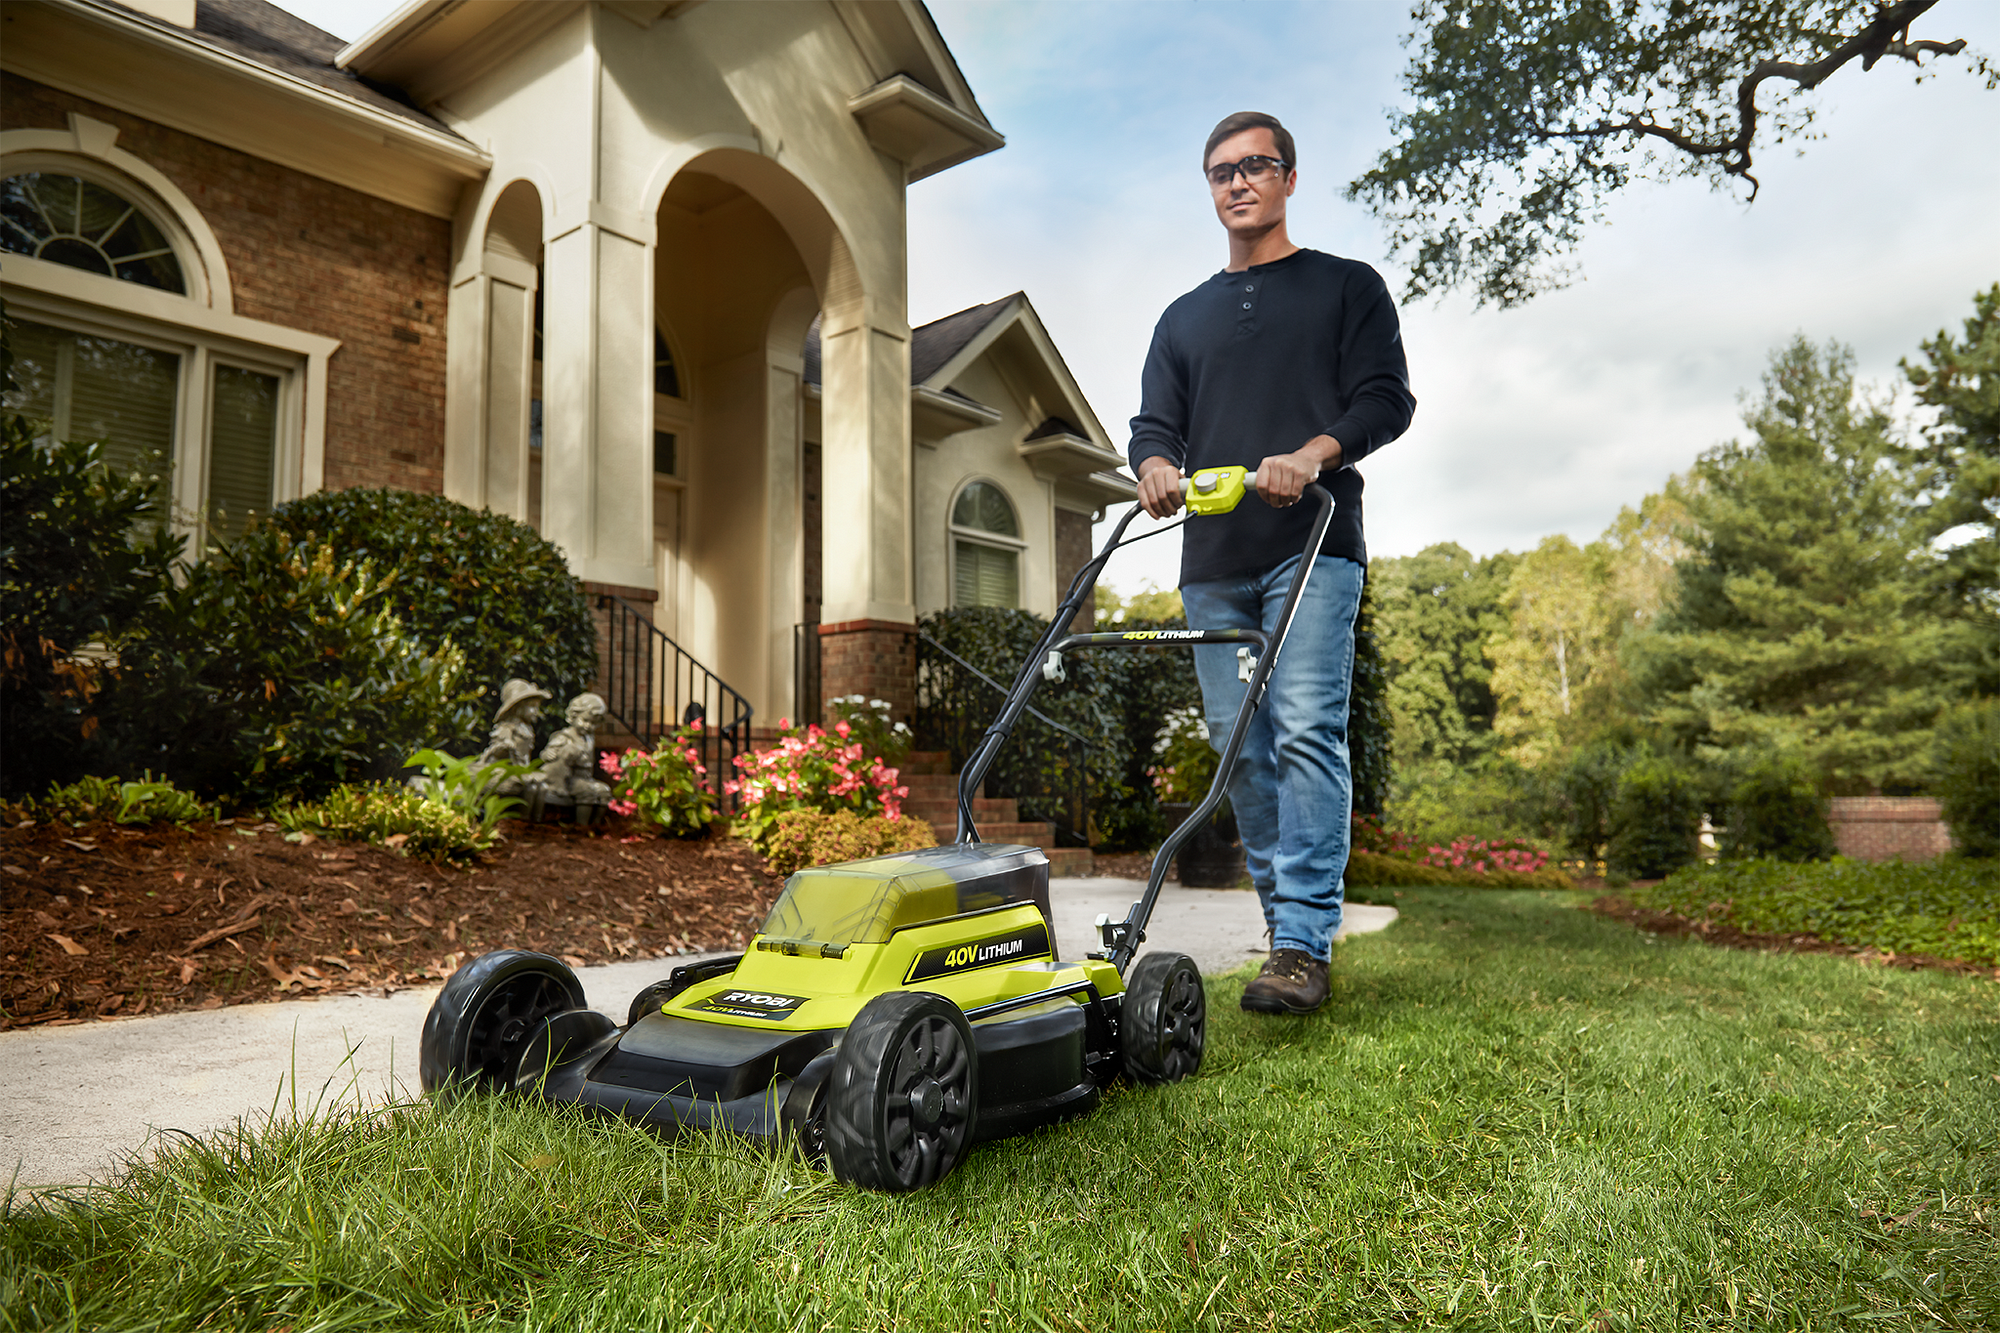 RYOBI 40V Lithium Ion Electric Cordless Mower and String Trimmer